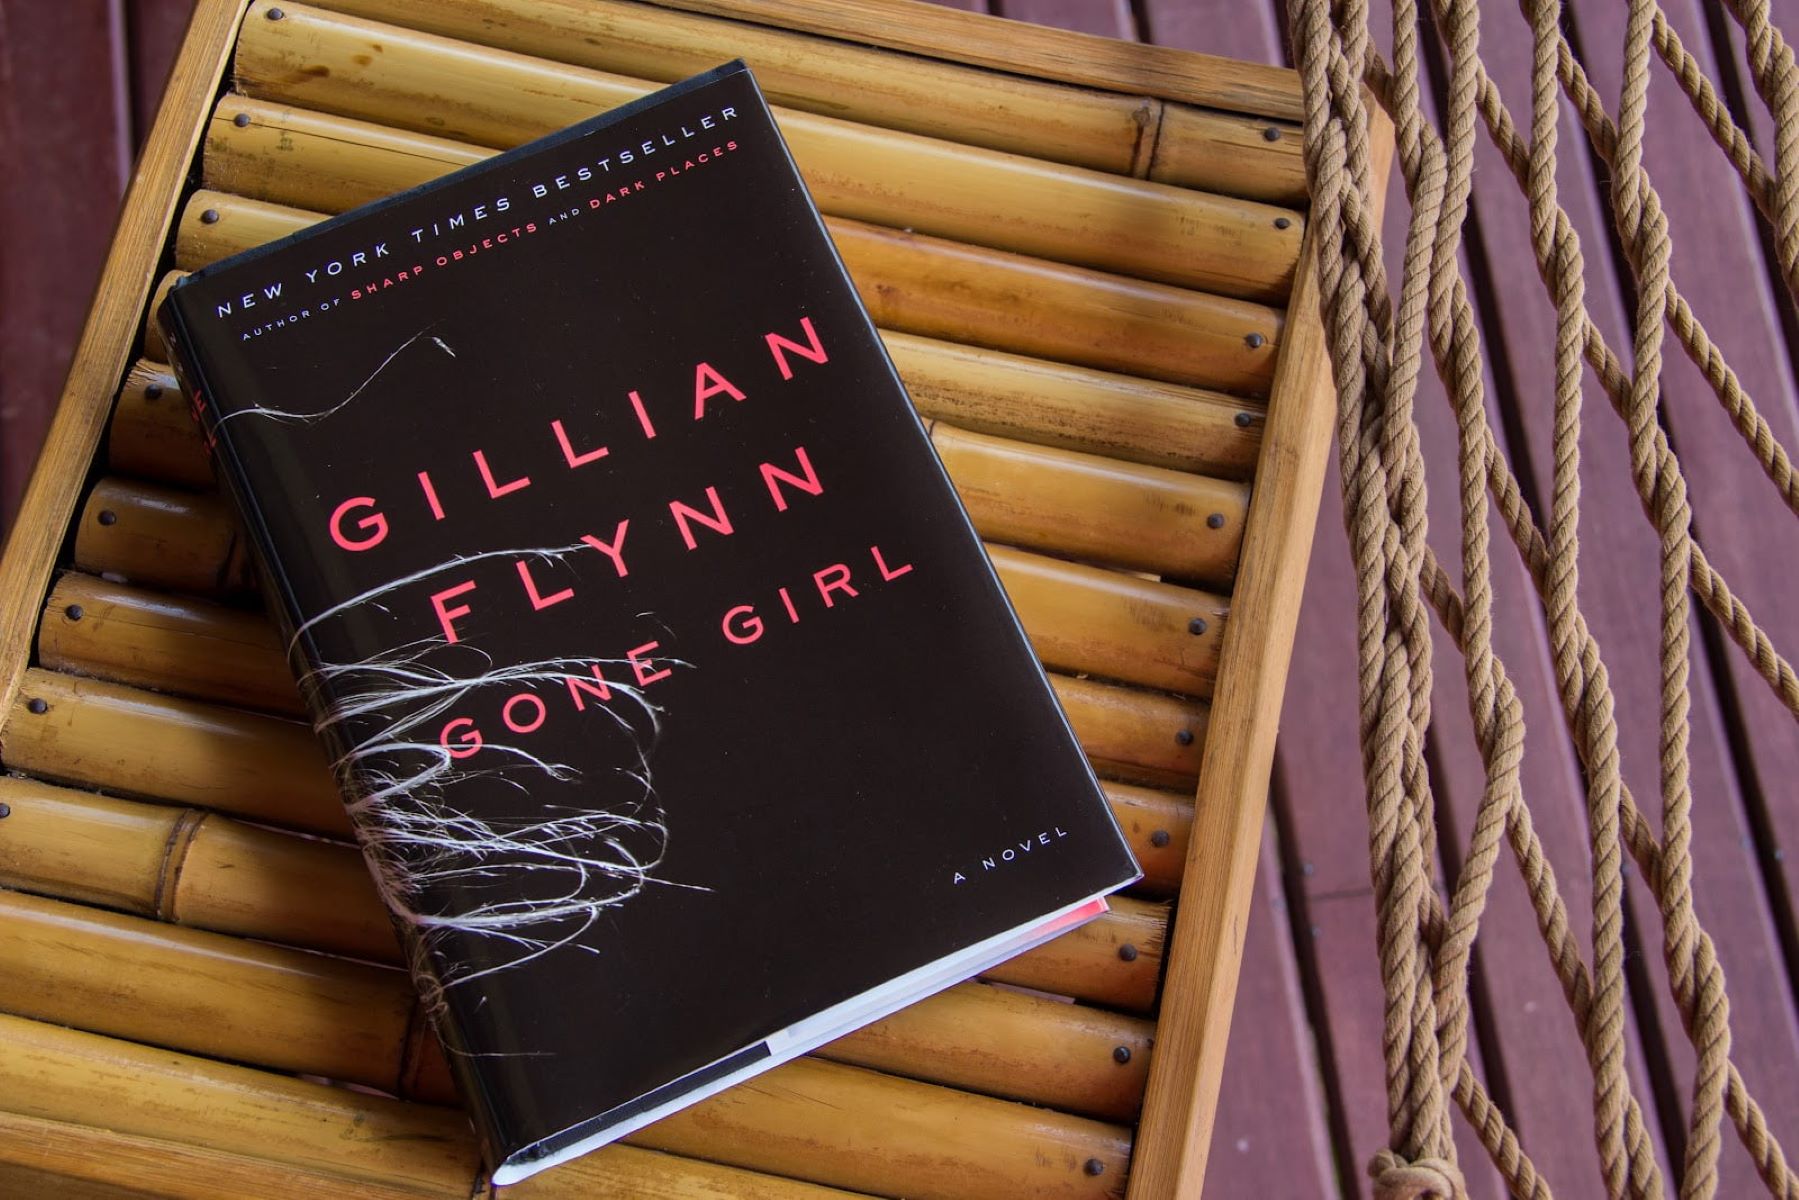 15-extraordinary-facts-about-gone-girl-gillian-flynn